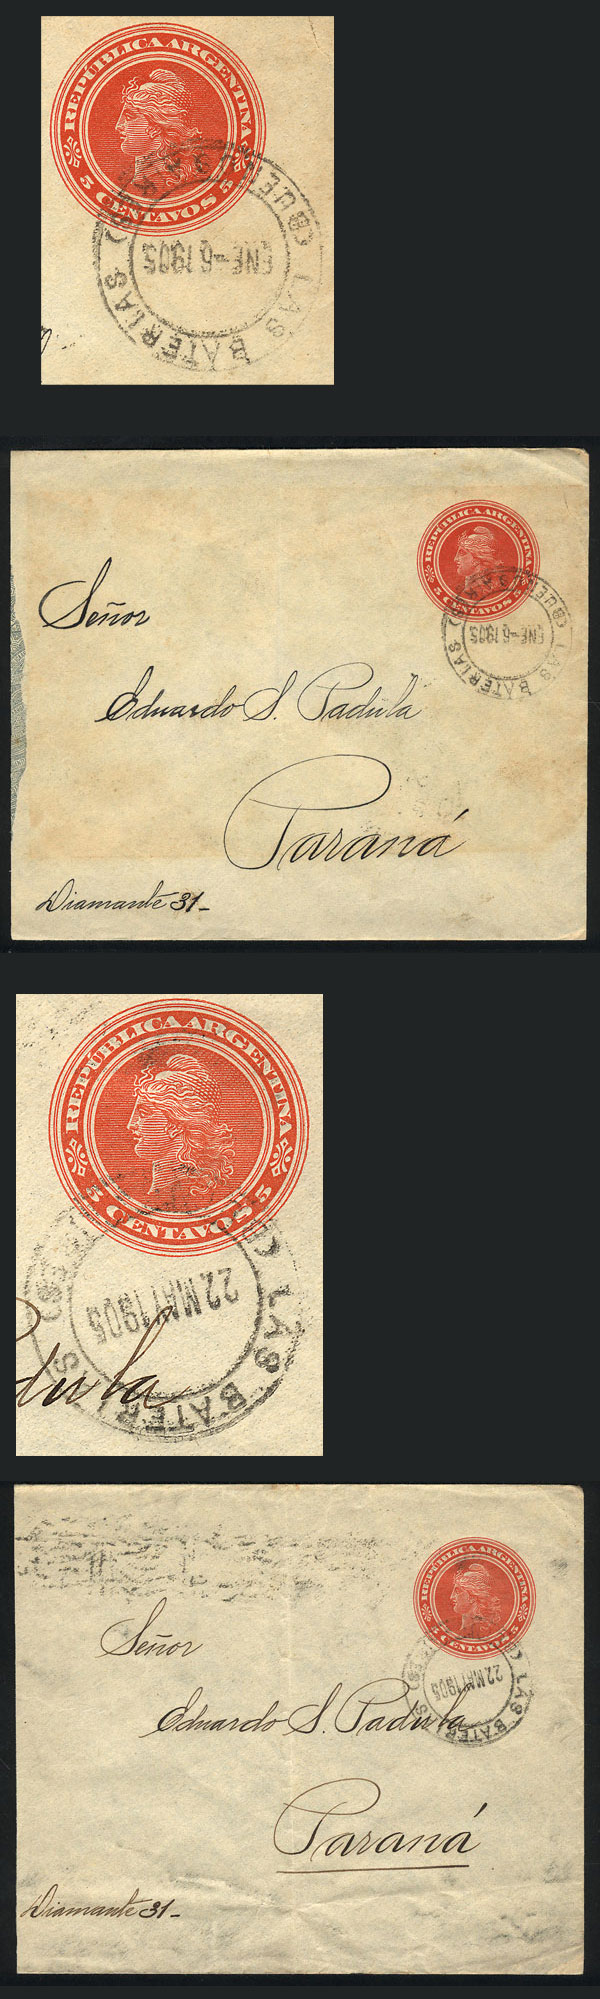 Lot 1519 - Argentina postal history -  Guillermo Jalil - Philatino Auction # 2148 ARGENTINA: General auction with very interesting material